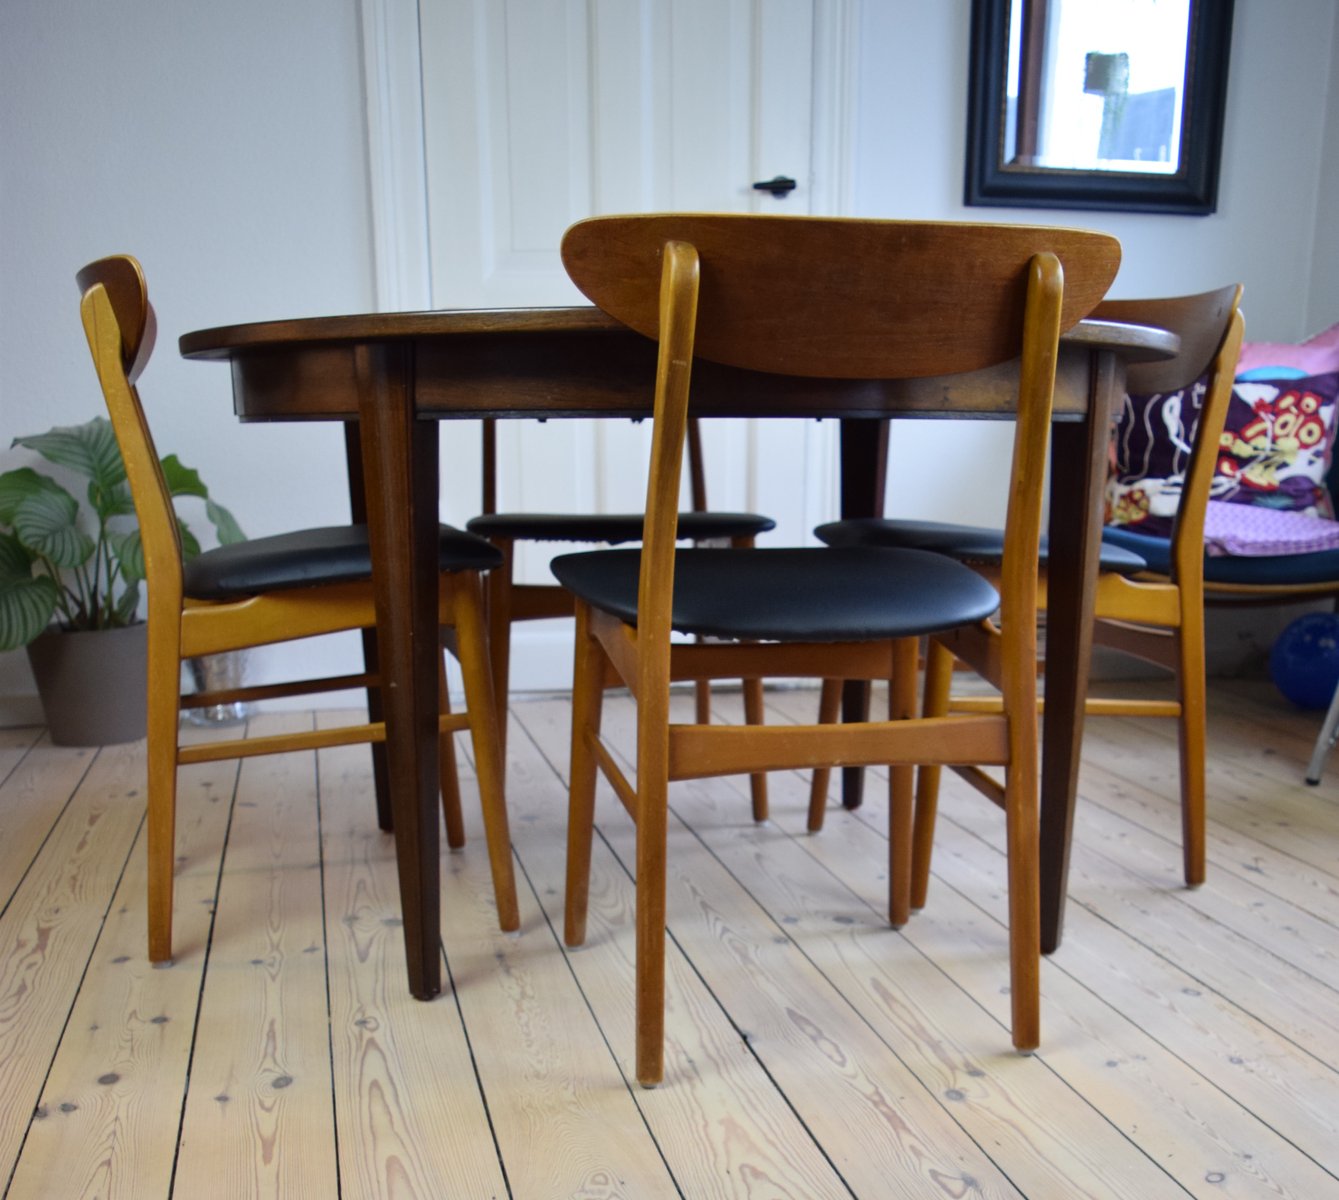 Danish Teak Beech Dining Chairs 1960s Set Of 4 For Sale At Pamono